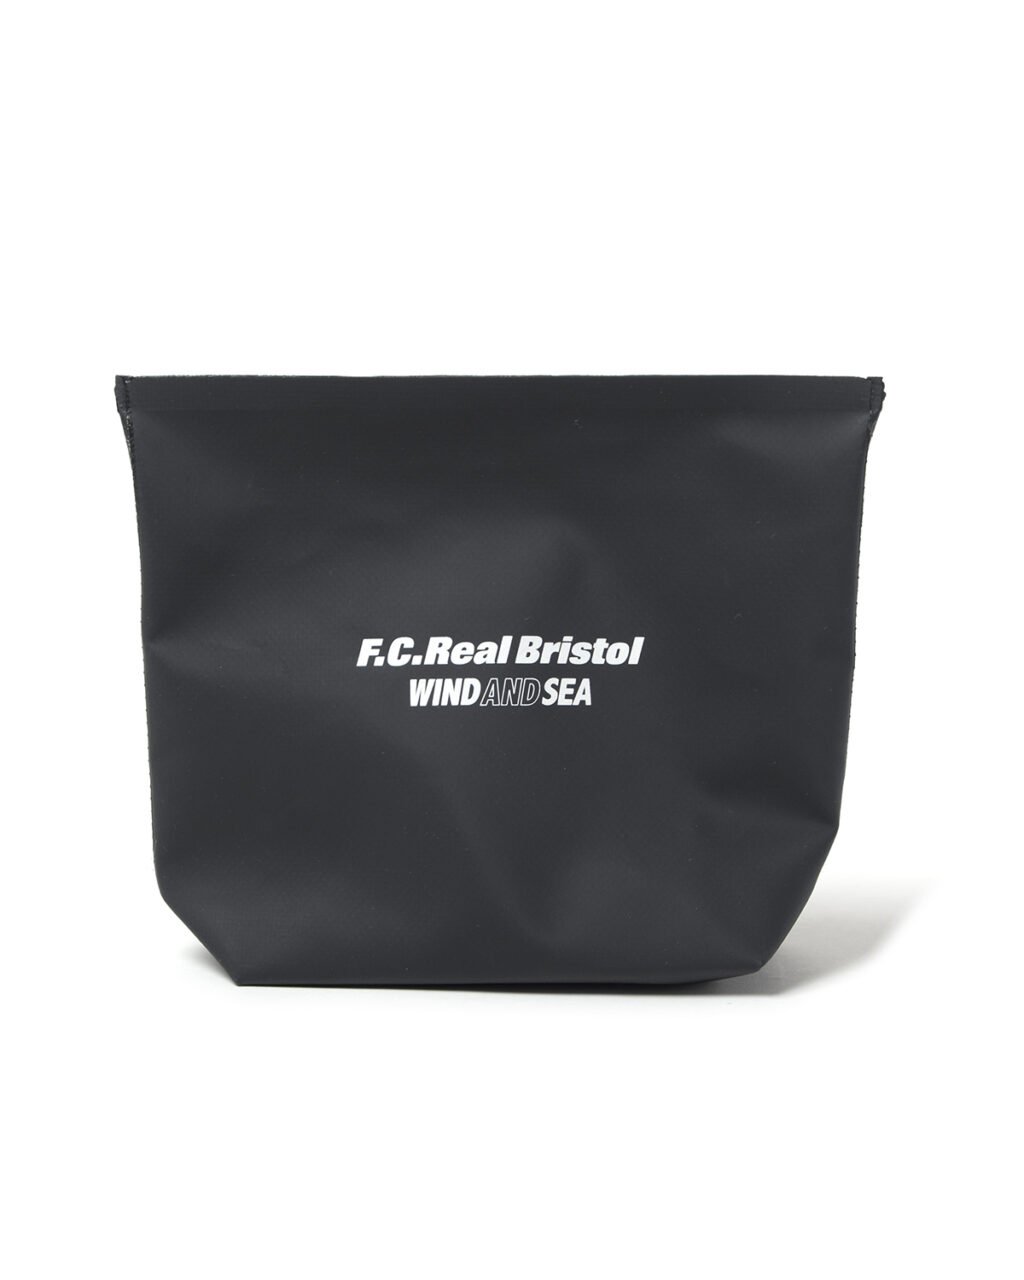 F.C.Real Bristol and WIND AND SEA Unveil its 'Team Recovery Pack